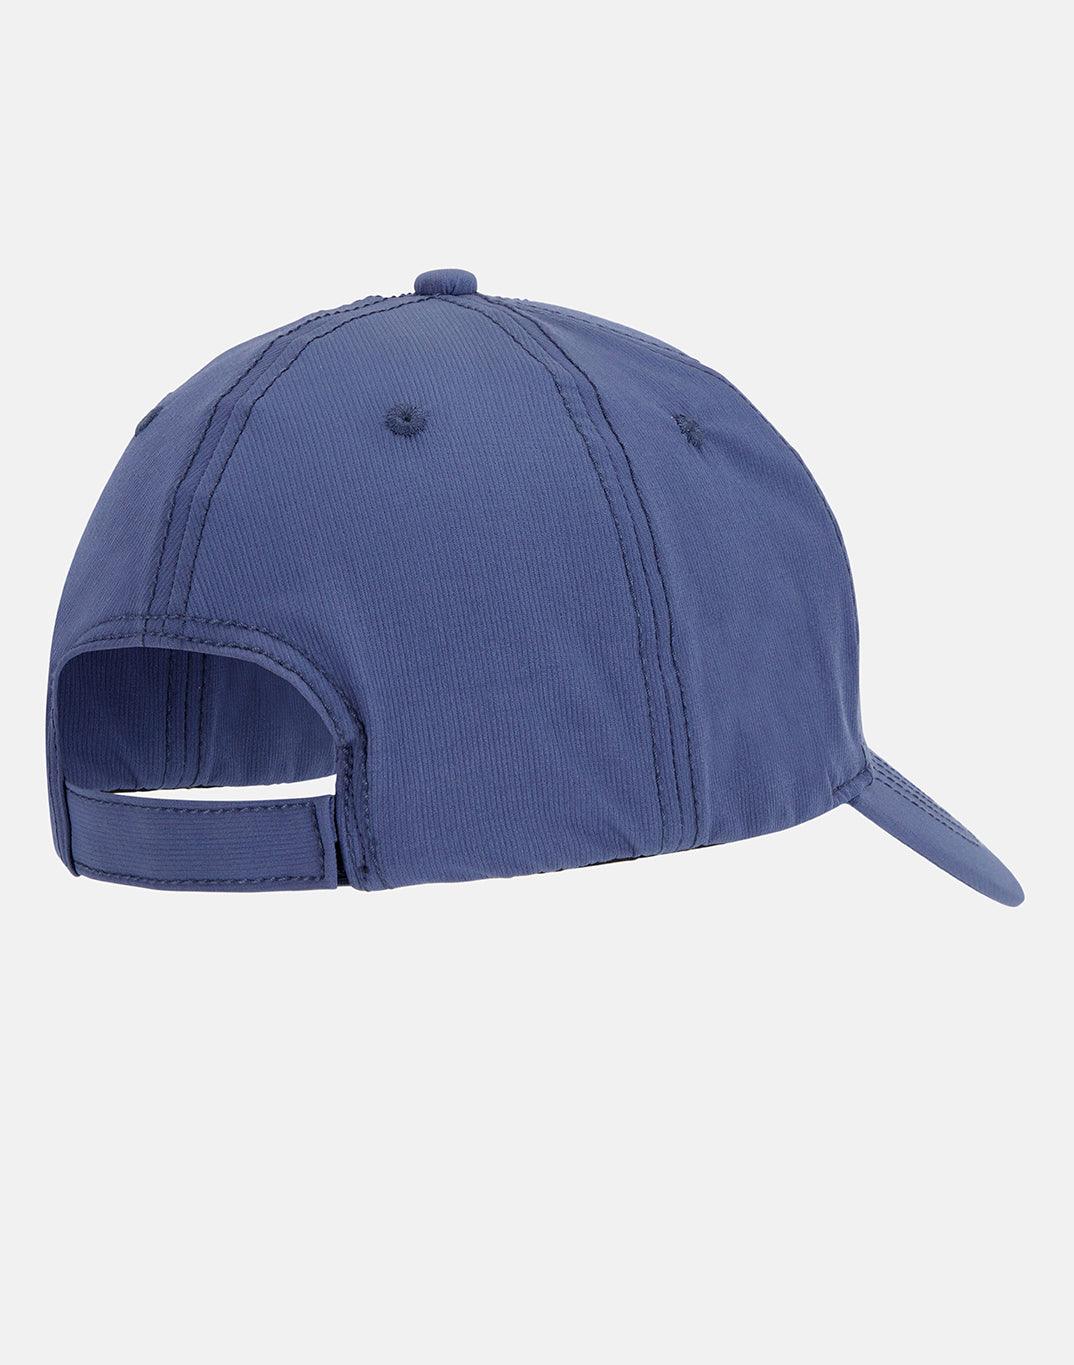 No Shade Cap in Navy | Gym+Coffee IE